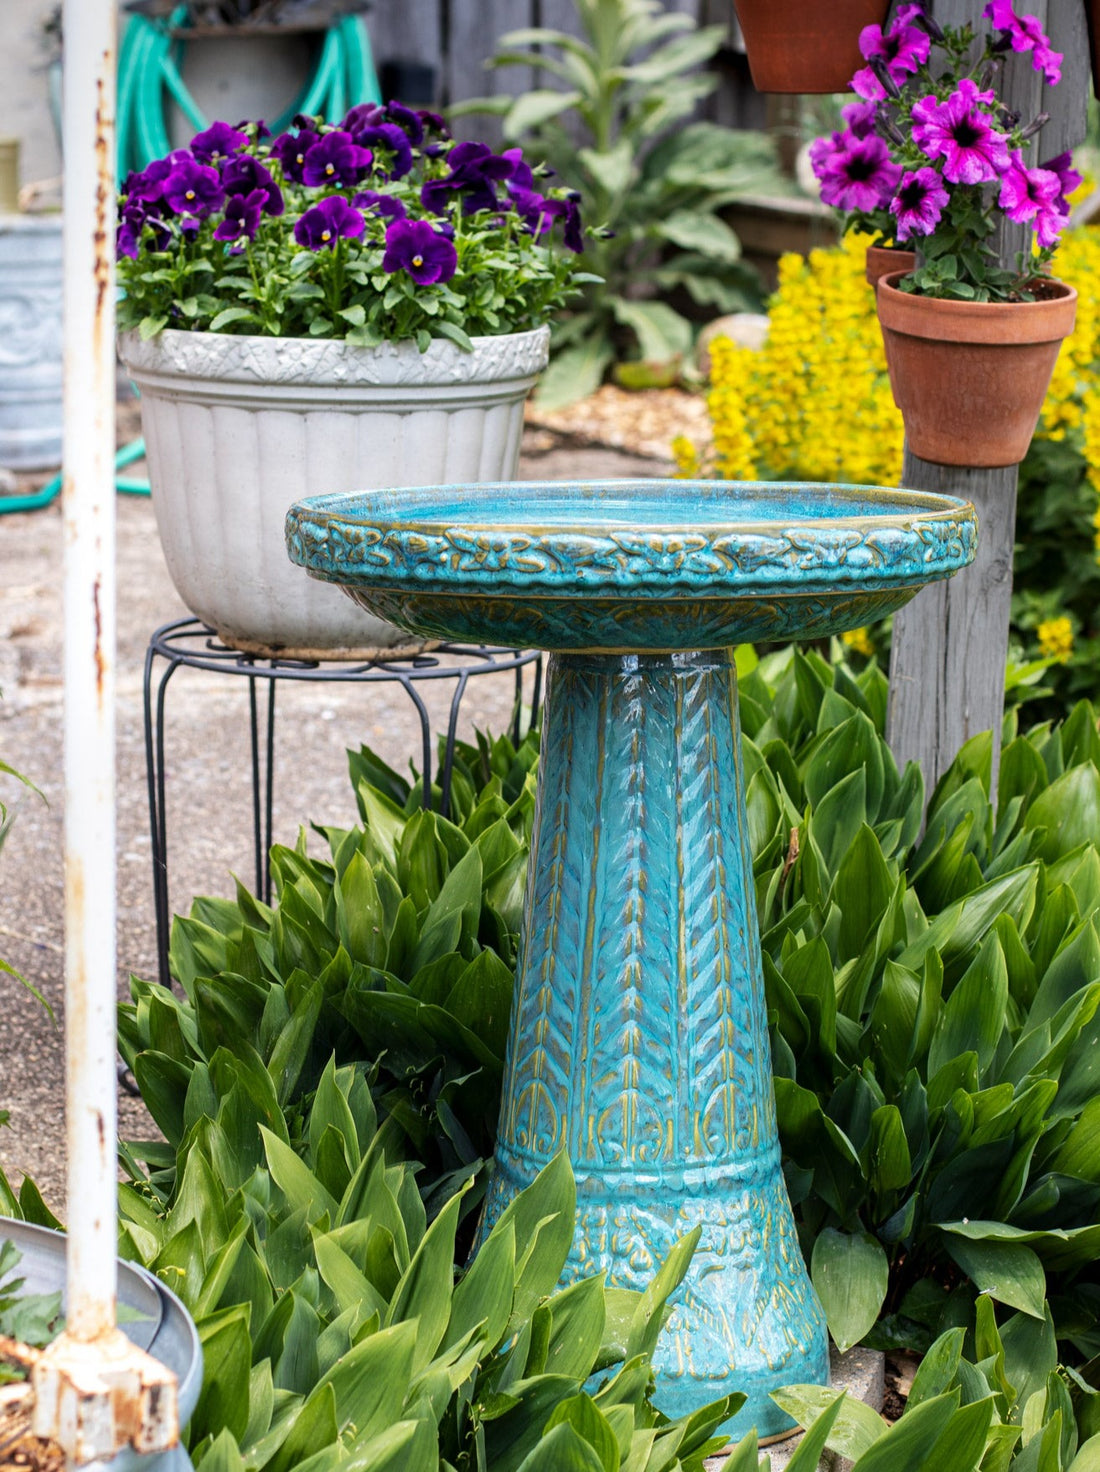 ceramic Turquoise birdbath set with birds flowers and a chevron design in a landscaped garden setting